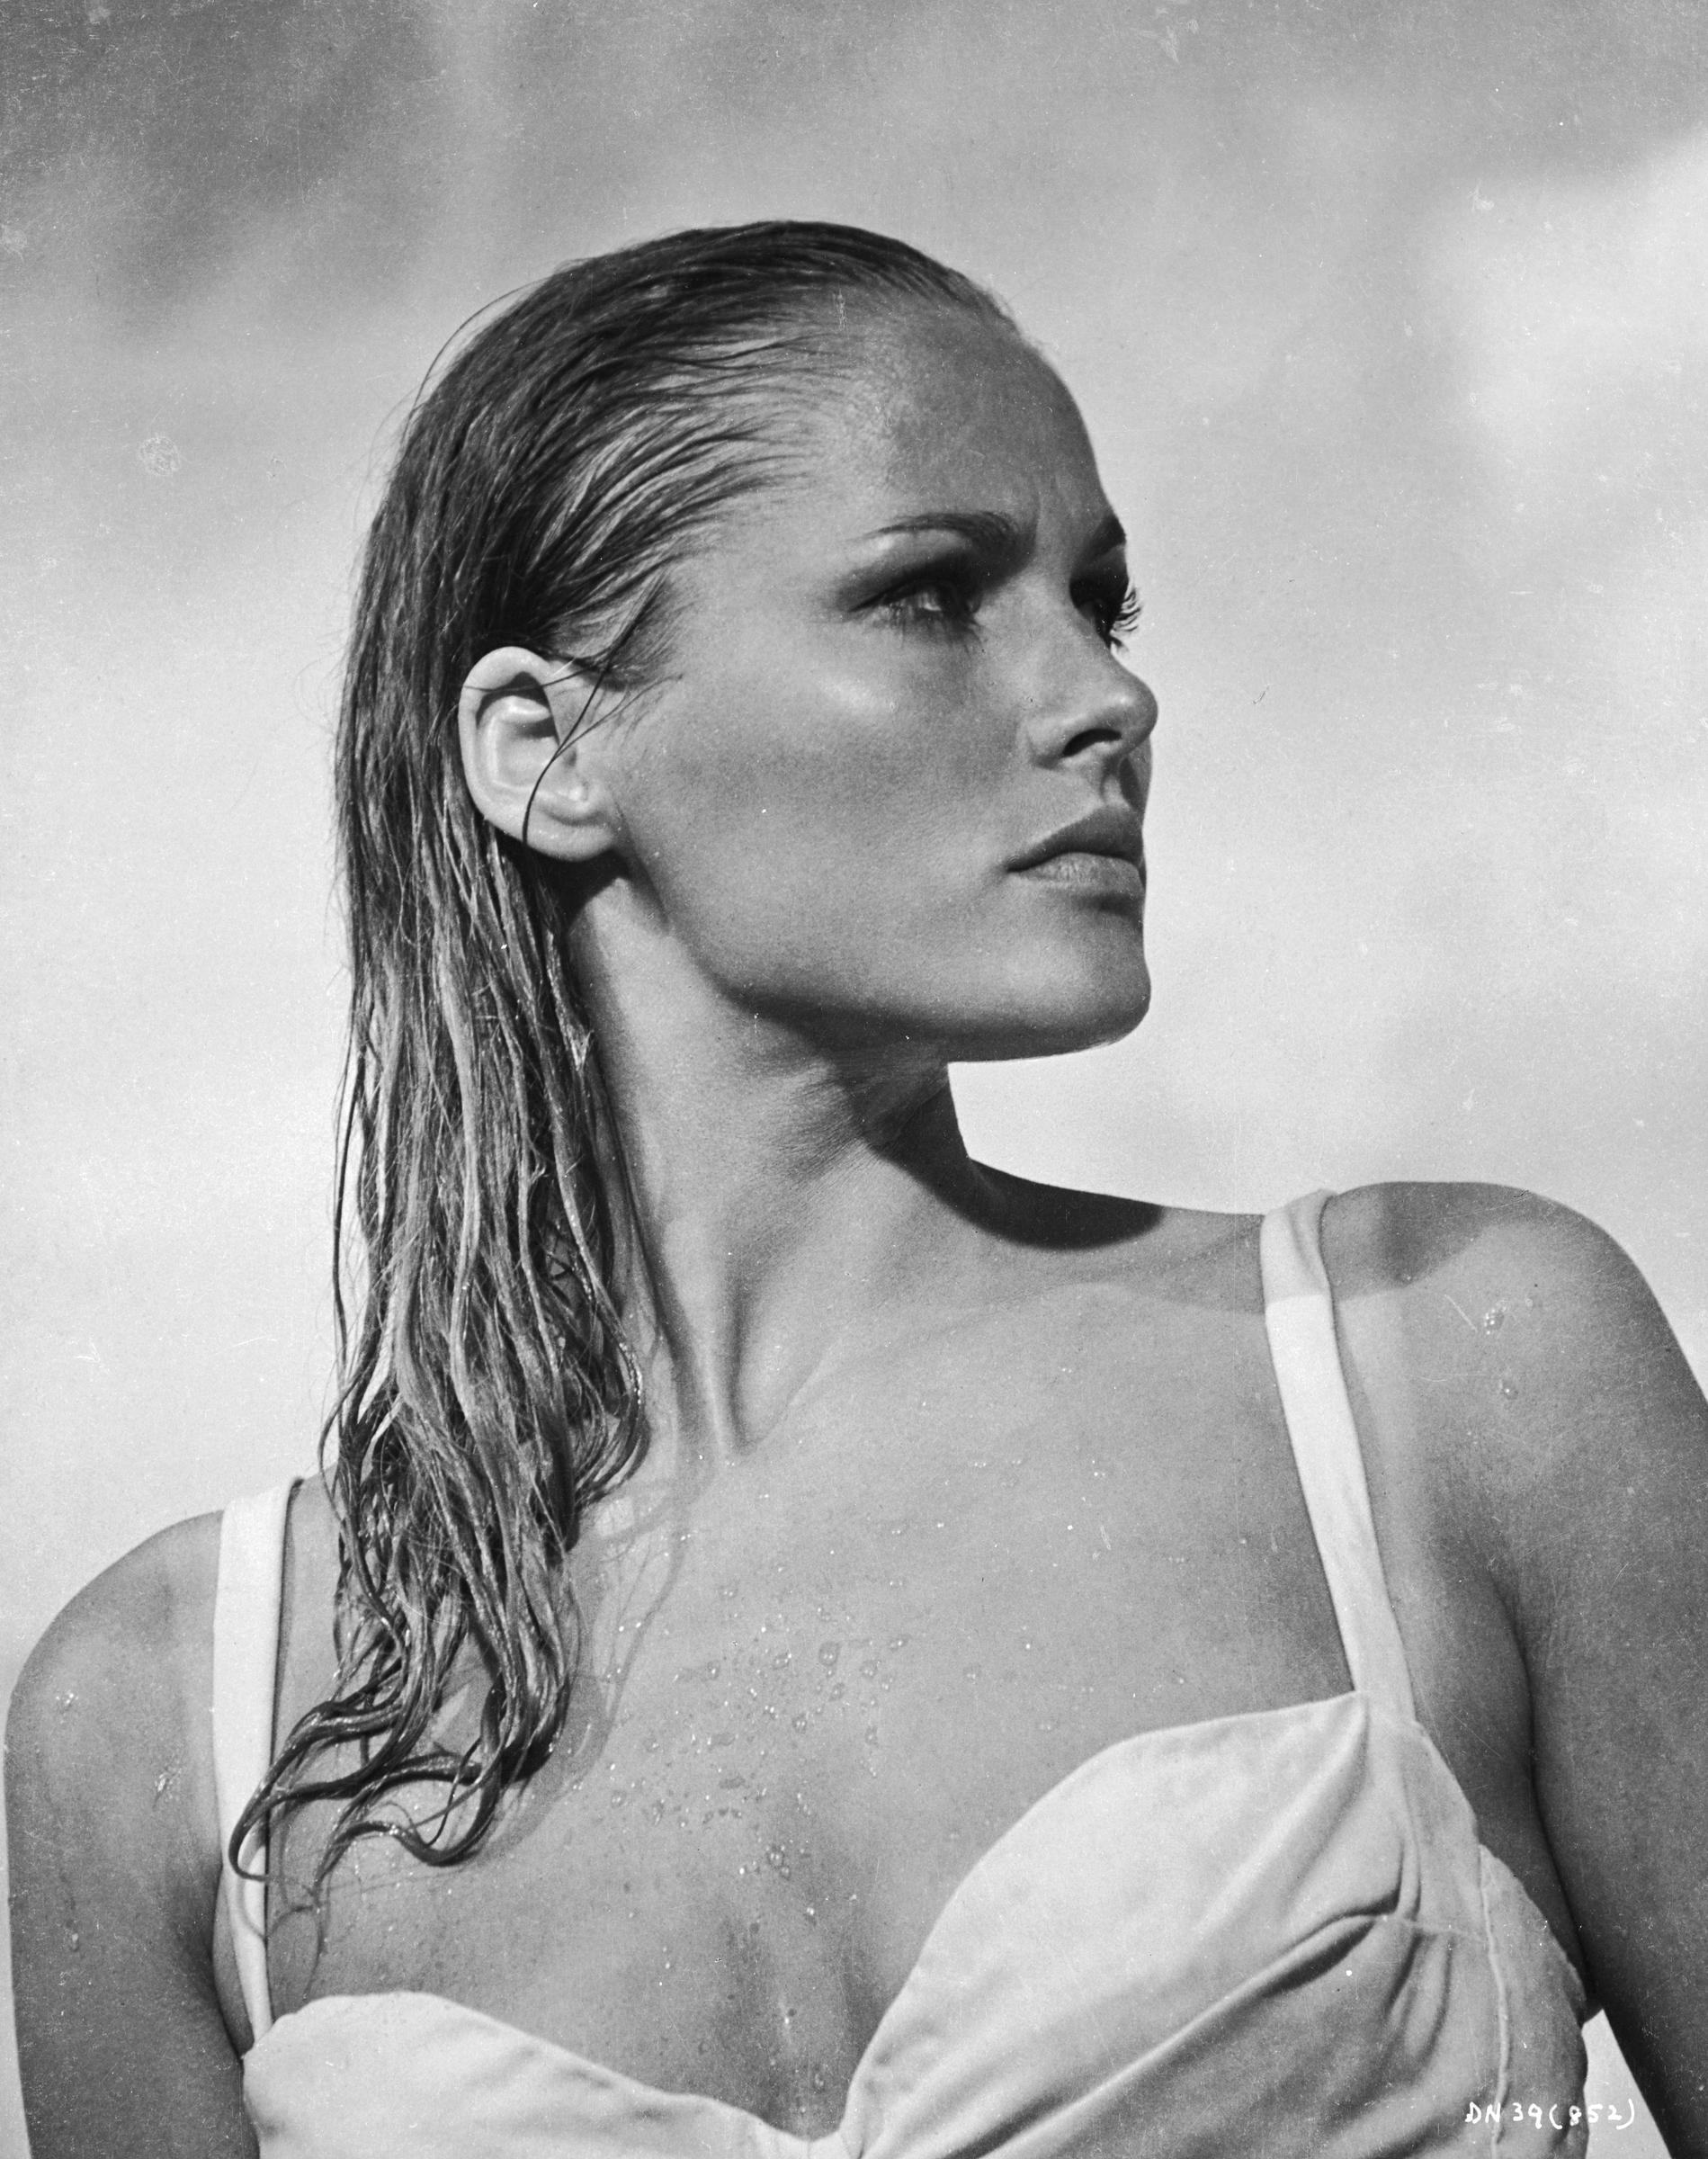 Ursula Andress as Honey Ryder in a scene from the first James Bond movie 'Dr No,' in 1962. | Source: Getty Images